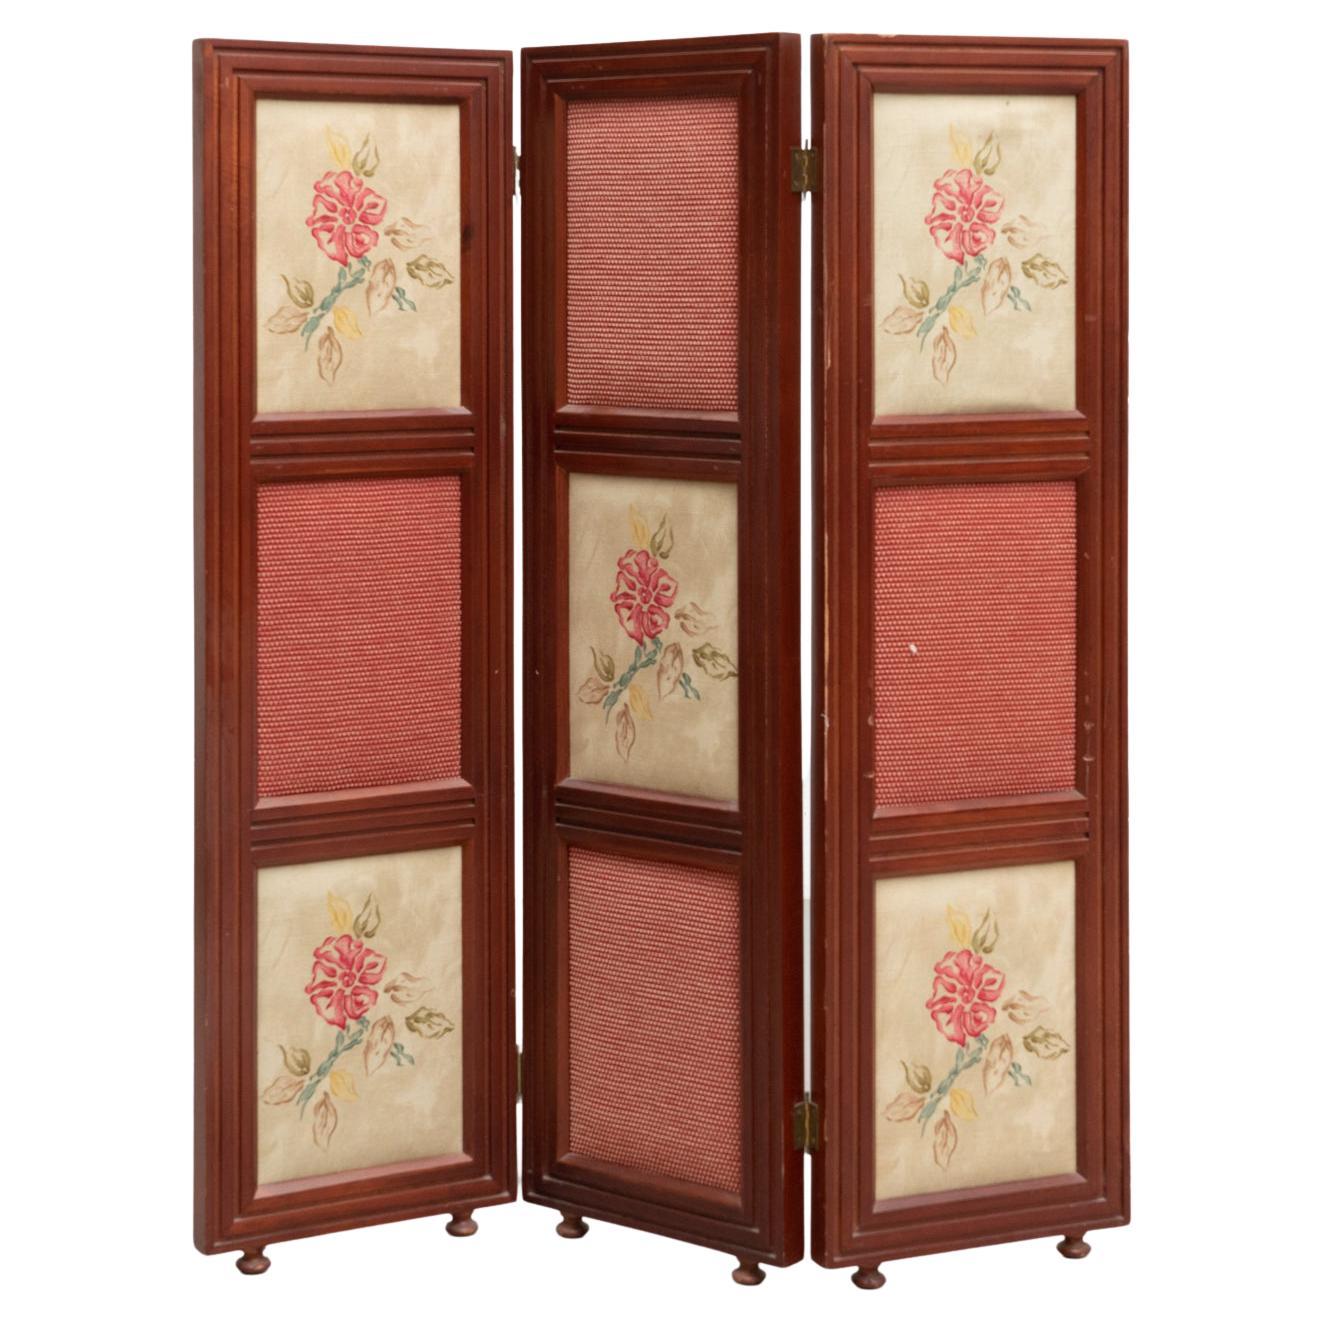 Details about   6 Panel Room Divider Wood Folding Indoor Furniture Screen Partition Home Decor 